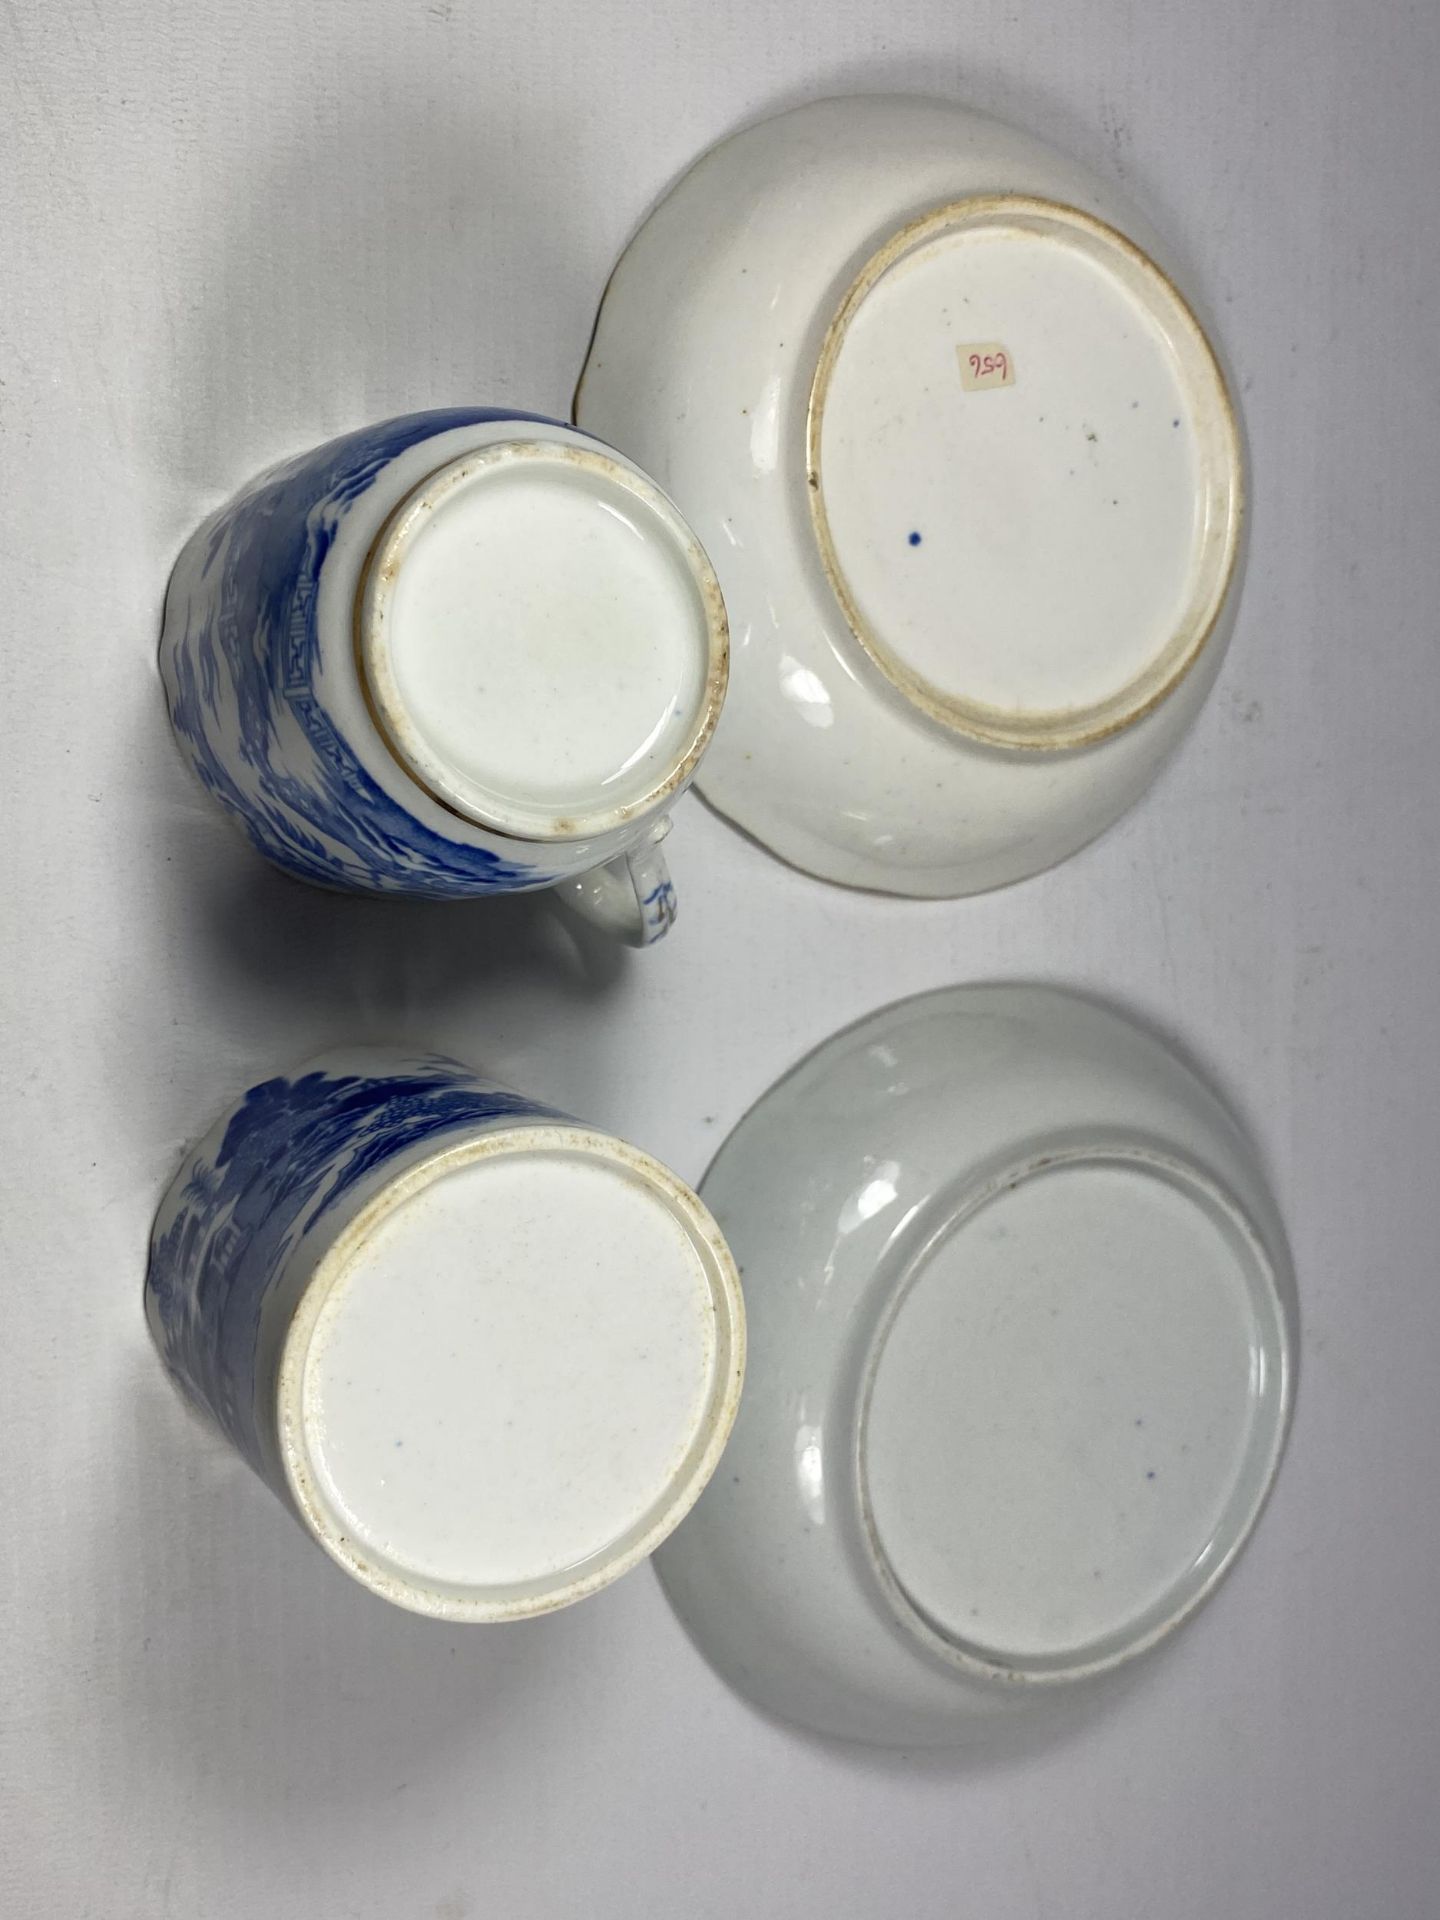 TWO CHINESE QING EXPORT BLUE AND WHITE PORCELAIN CUPS & SAUCERS, CUP HEIGHT 6.5CM - Image 5 of 6